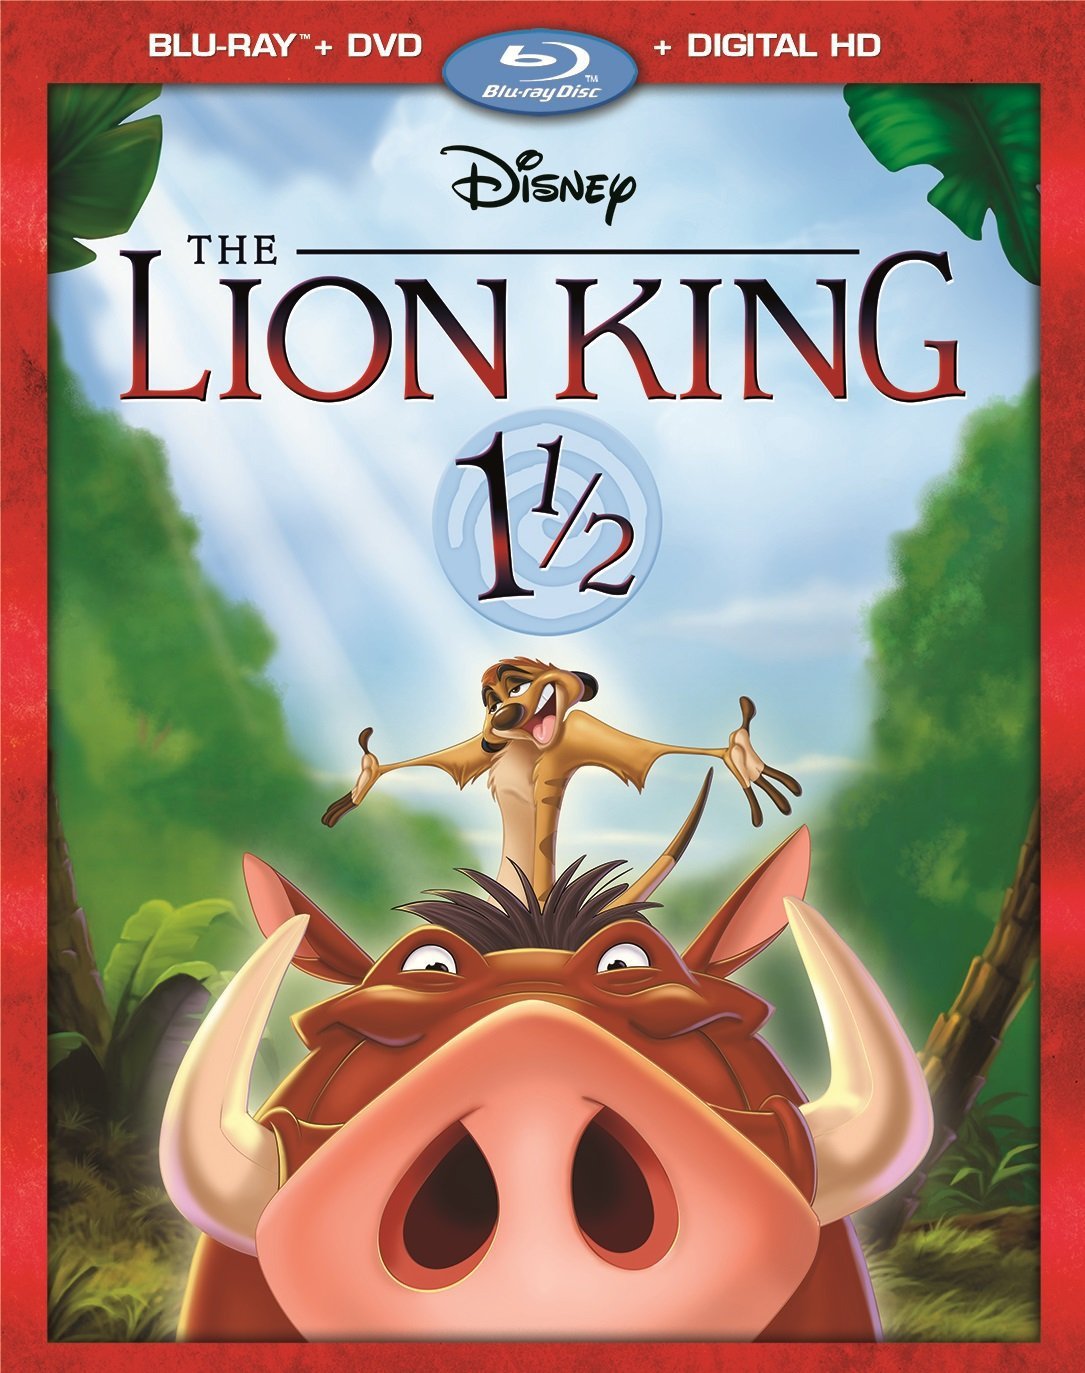 Lion King 1 1/2, The